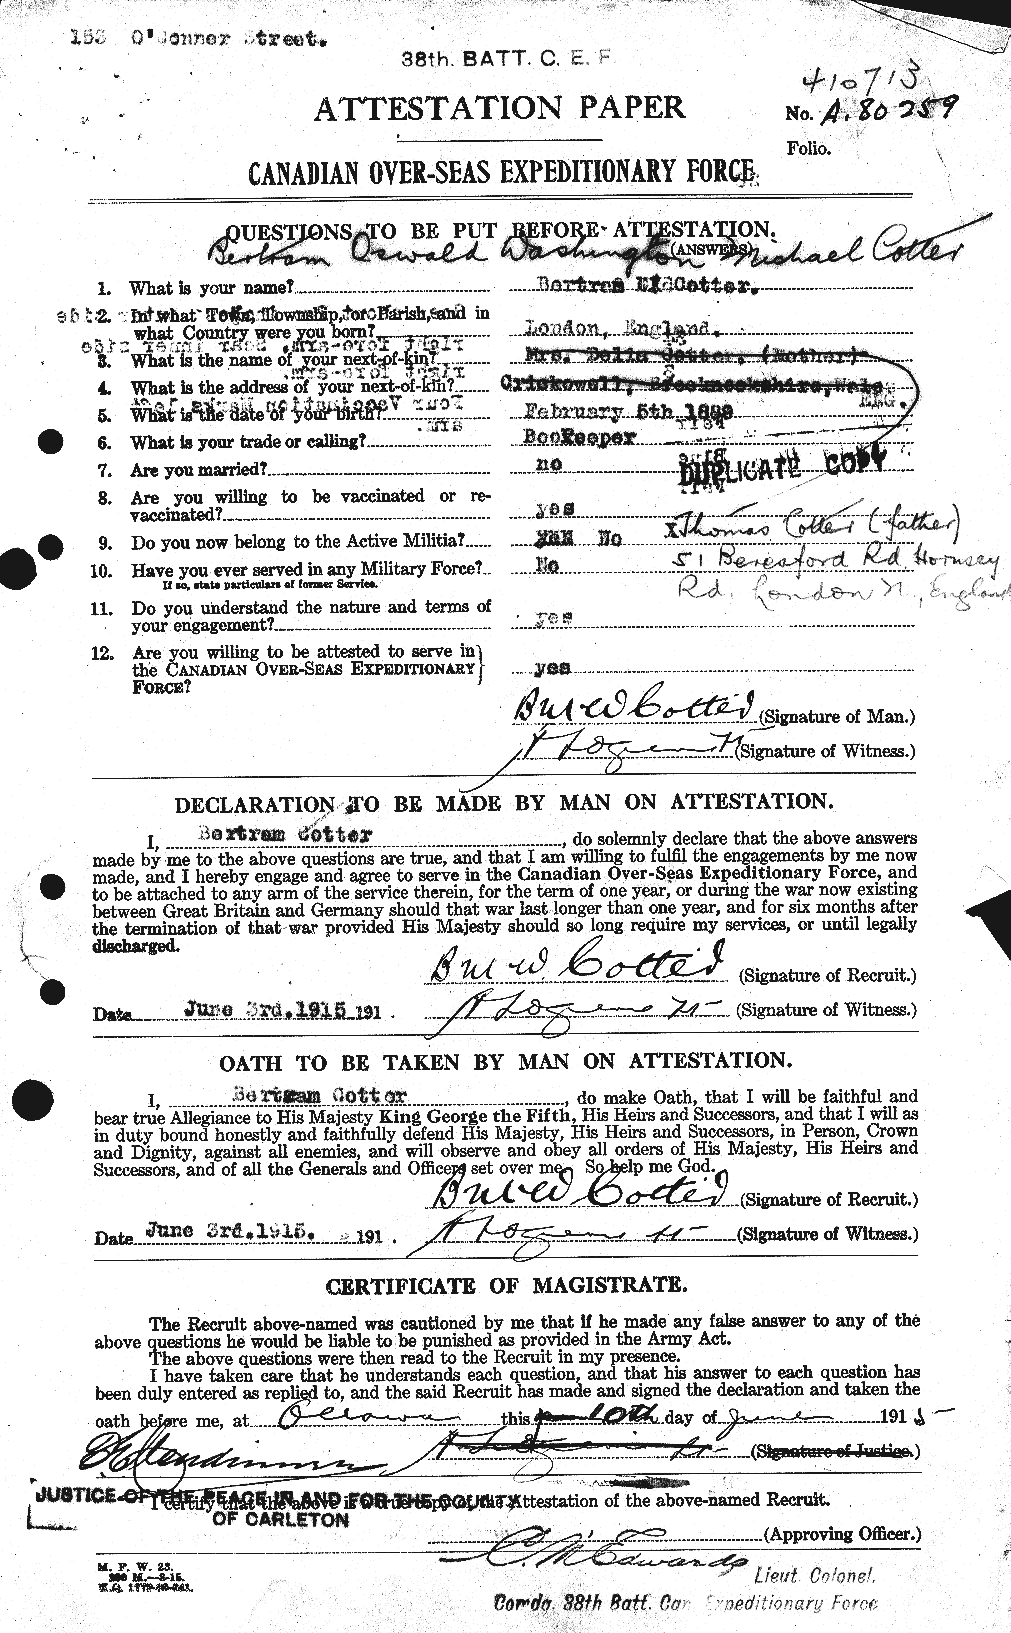 Personnel Records of the First World War - CEF 062930a